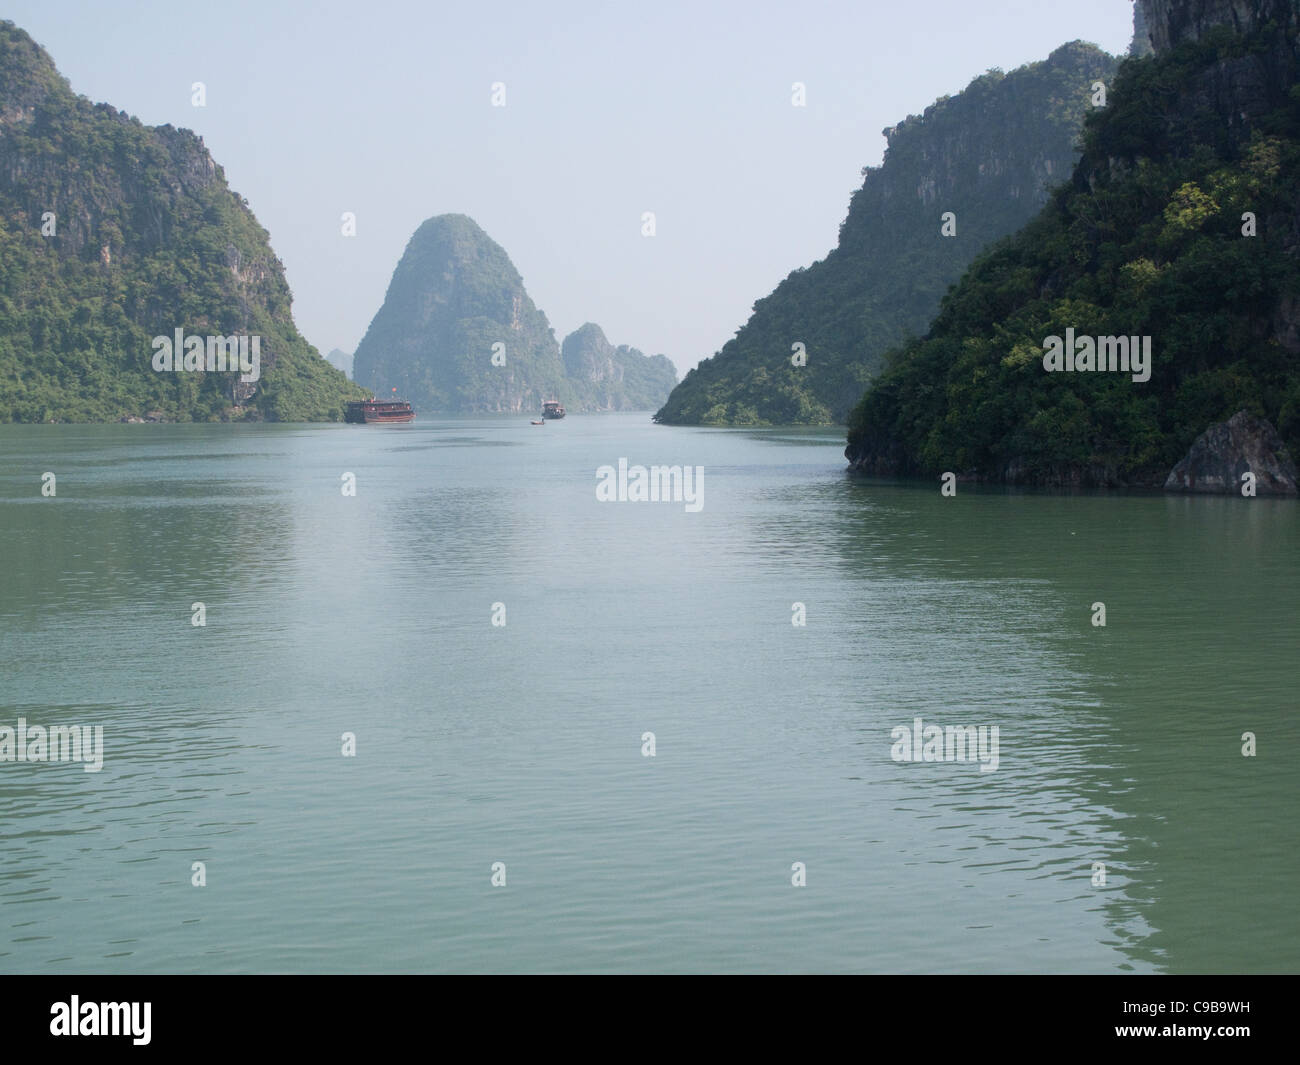 Halong Bay rock formations in the South China Sea, Vietnam Stock Photo